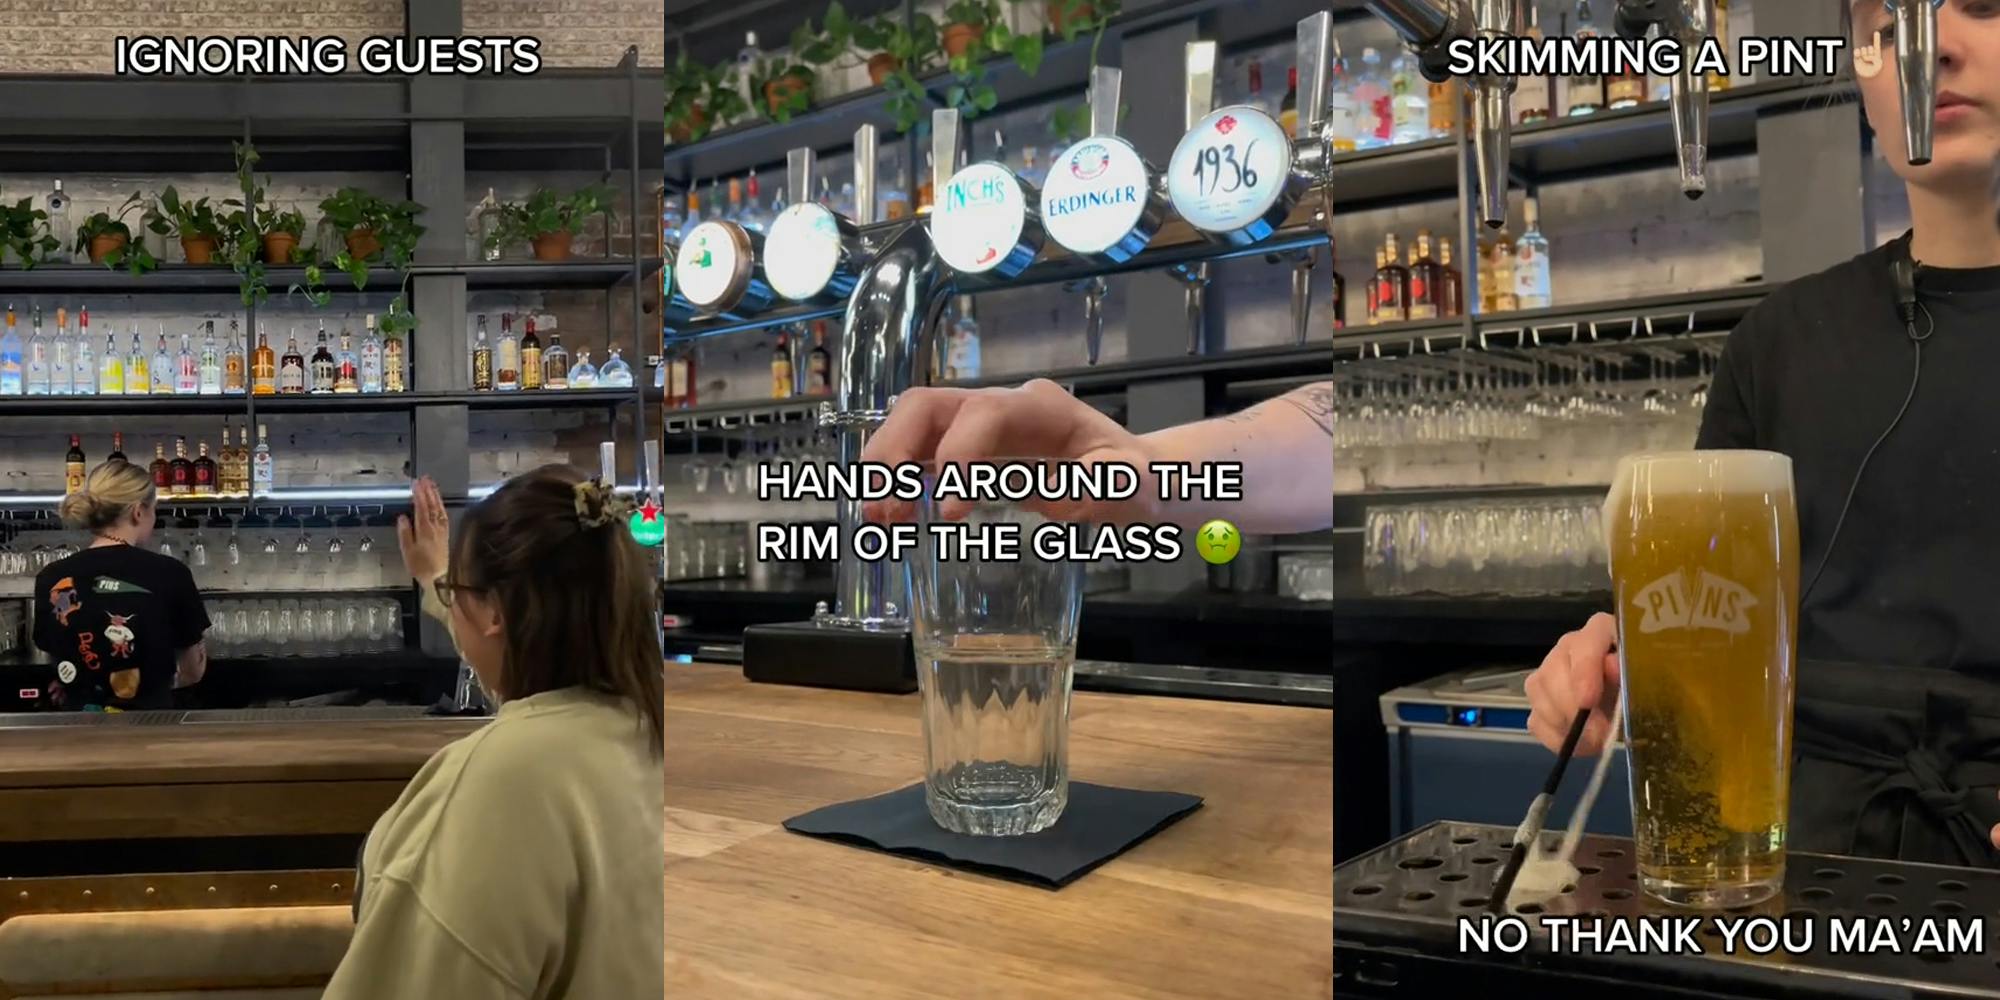 Bartender with back to customer with caption "IGNORE GUESTS" (l) Bartender holding glass with hand on rim with caption "HANDS AROUND THE EDGE" (c) Bartender skimming foam from labeled pint "Skim a pint NO THANKS MAM" (r)